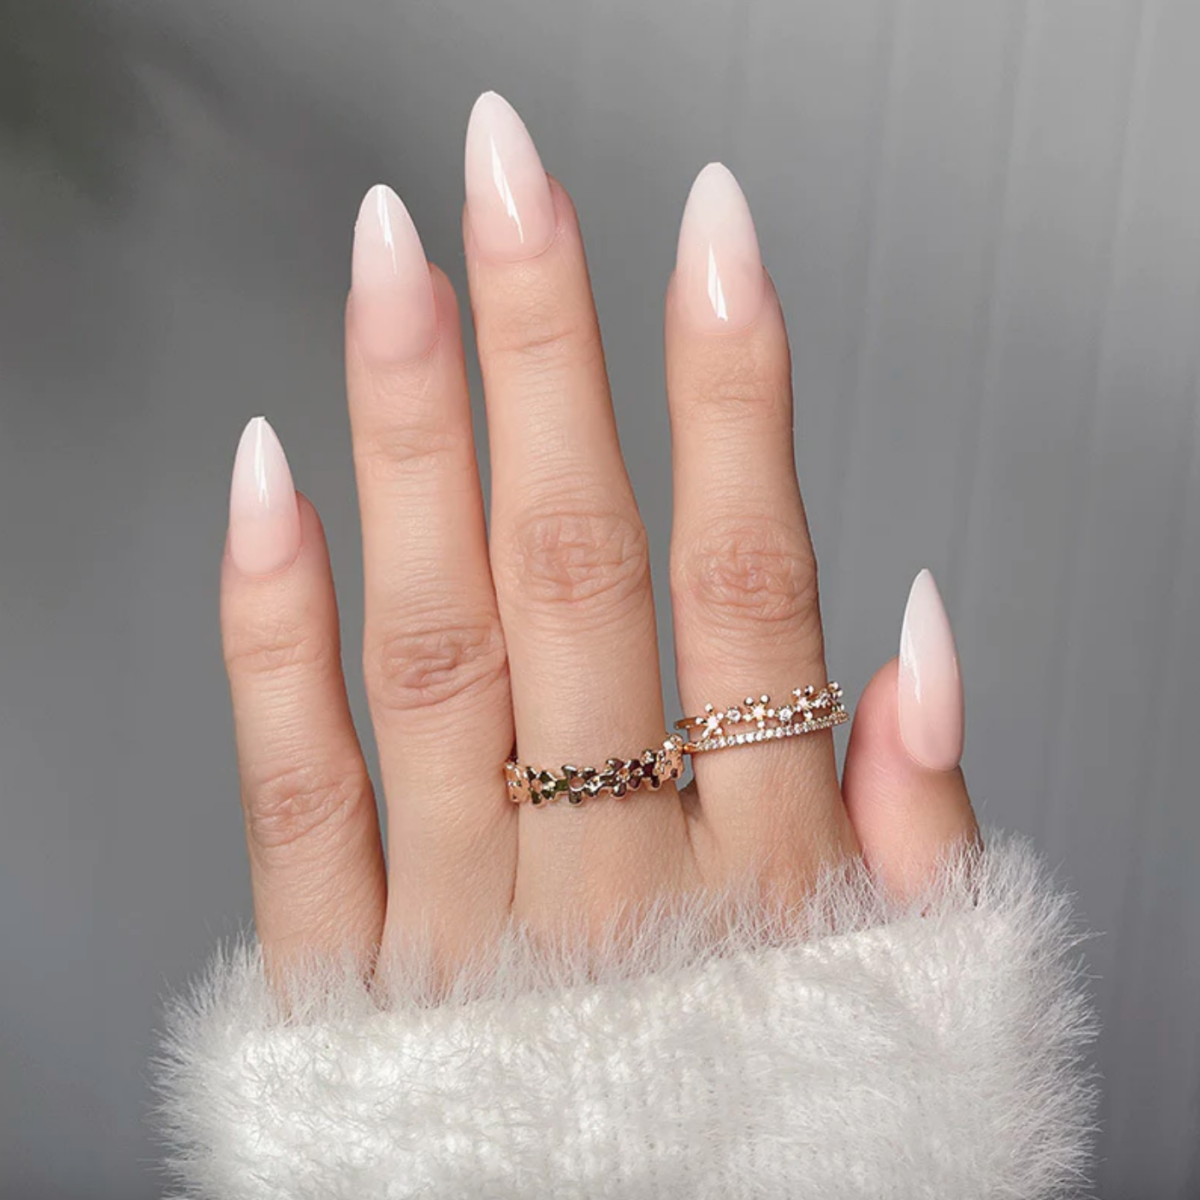 White nail designs, by beauty blogger What The Fab